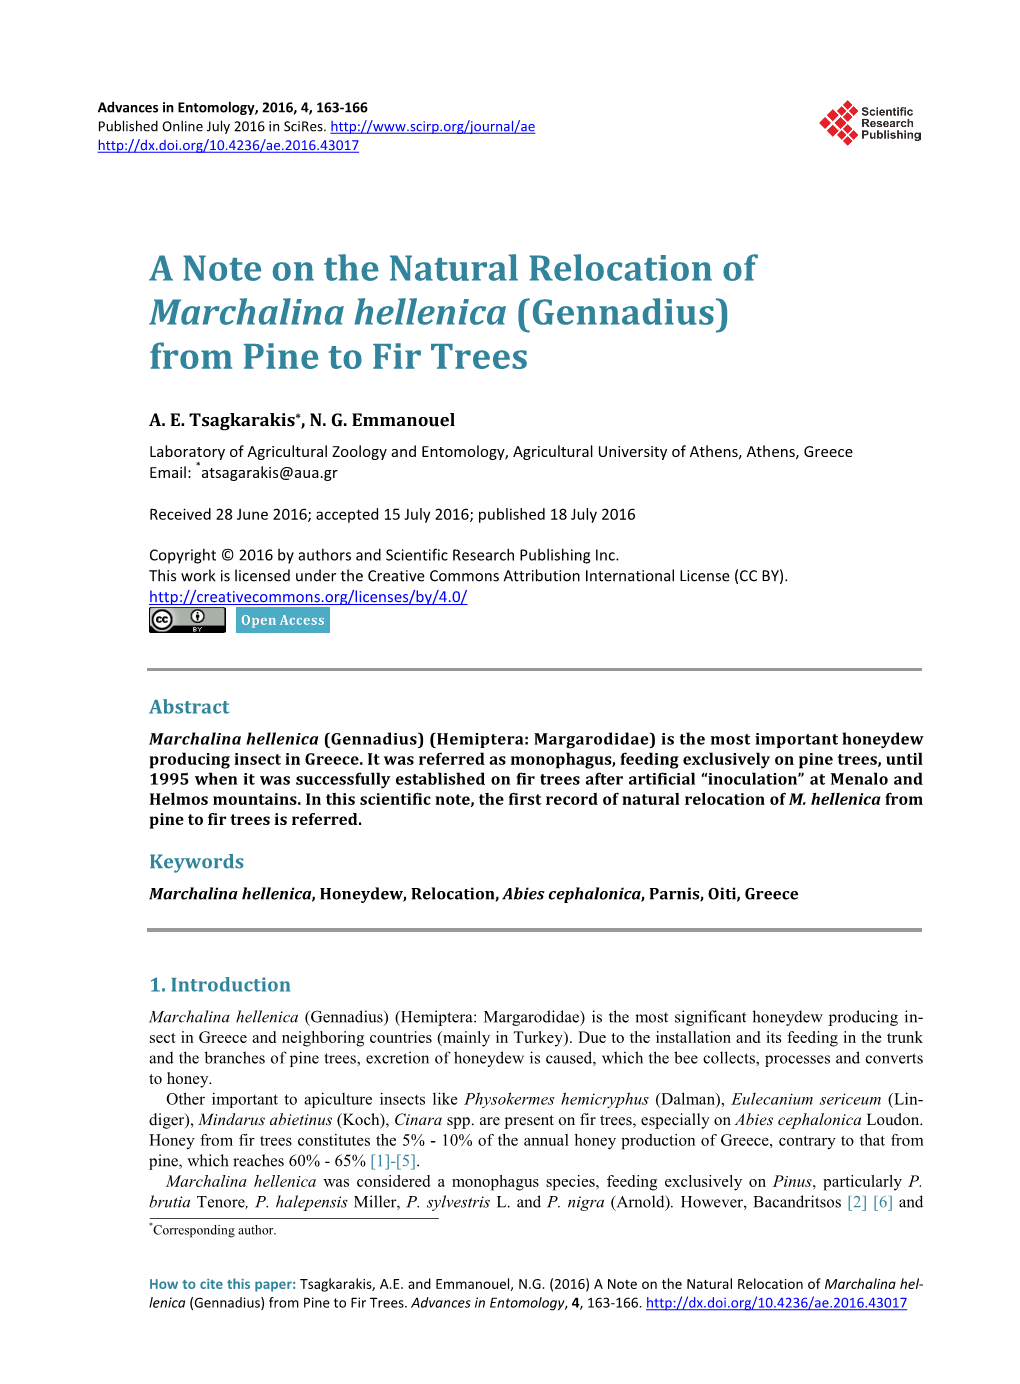 A Note on the Natural Relocation of Marchalina Hellenica (Gennadius) from Pine to Fir Trees